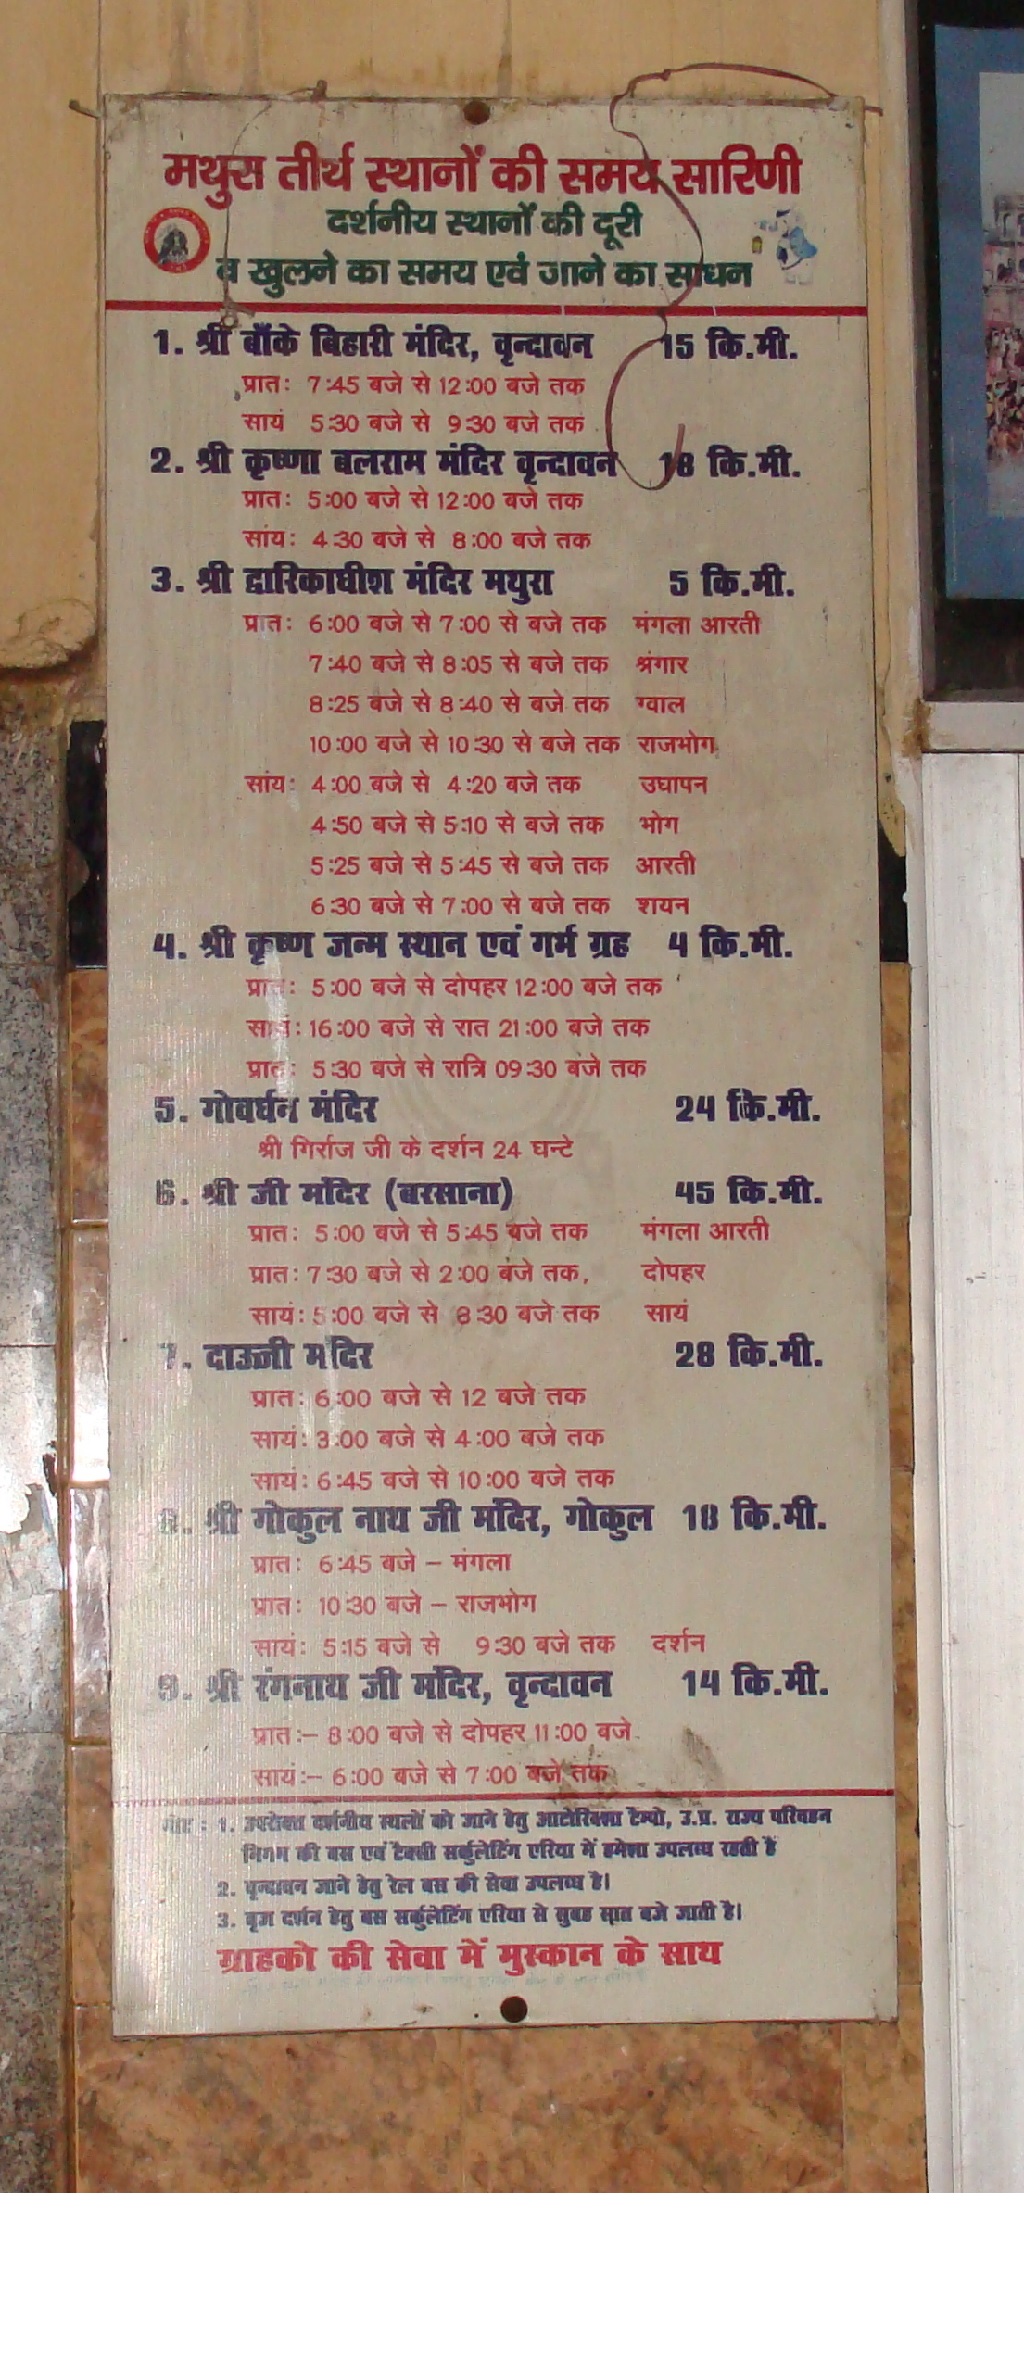 Timetable and Distance of Pilgrimage Places from Mathura Jn.